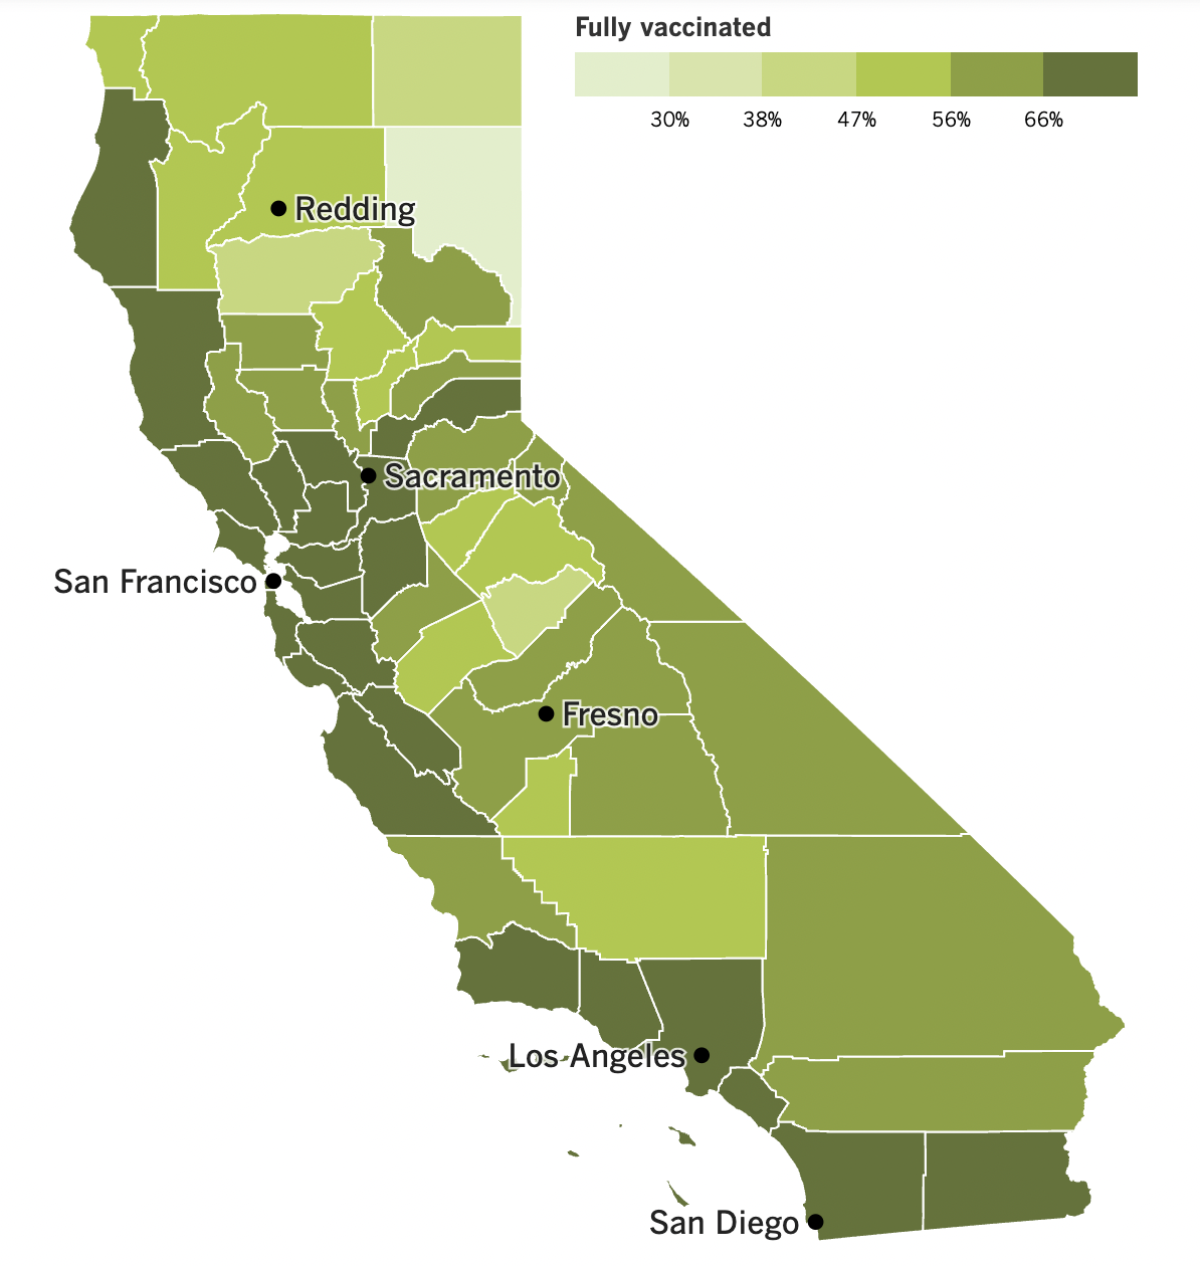 A map of California showing rates in each county in shades of green, with dark green representing over 60% fully vaccinated.